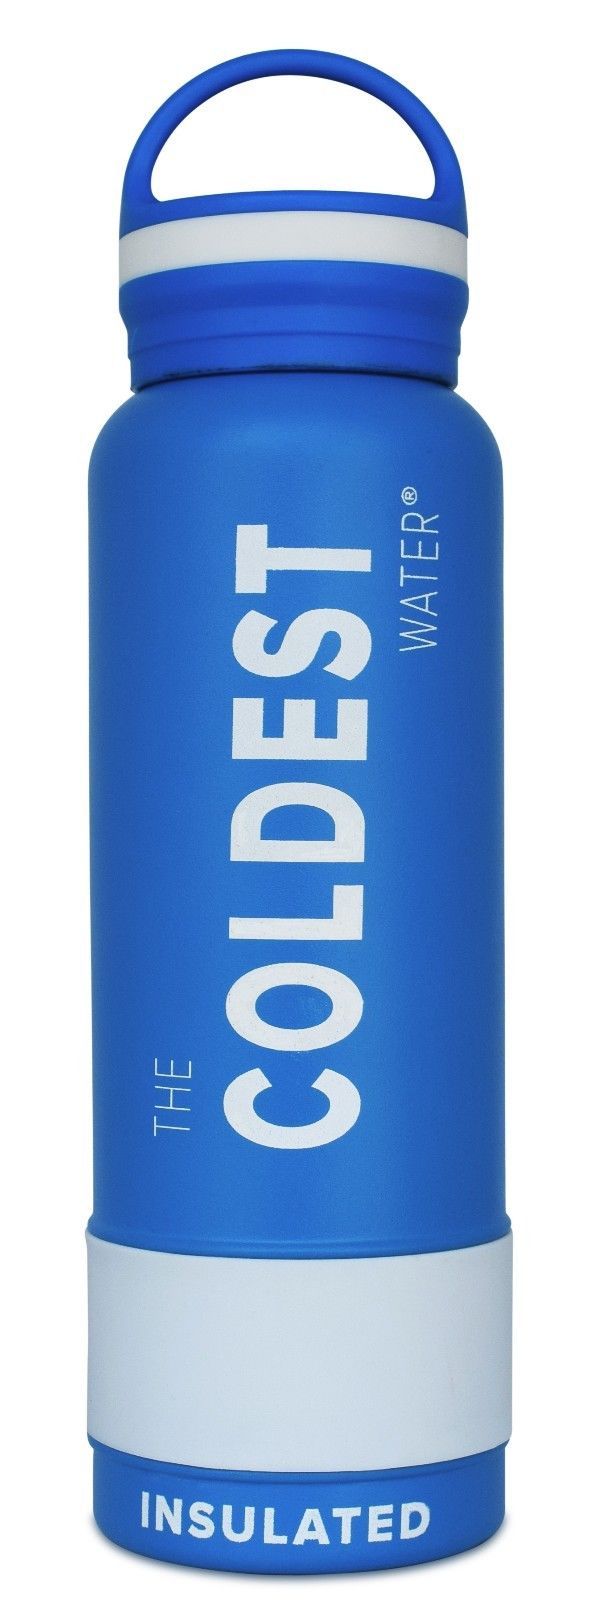 The Coldest Water Bottle 1 Customer Review And 1 Listing